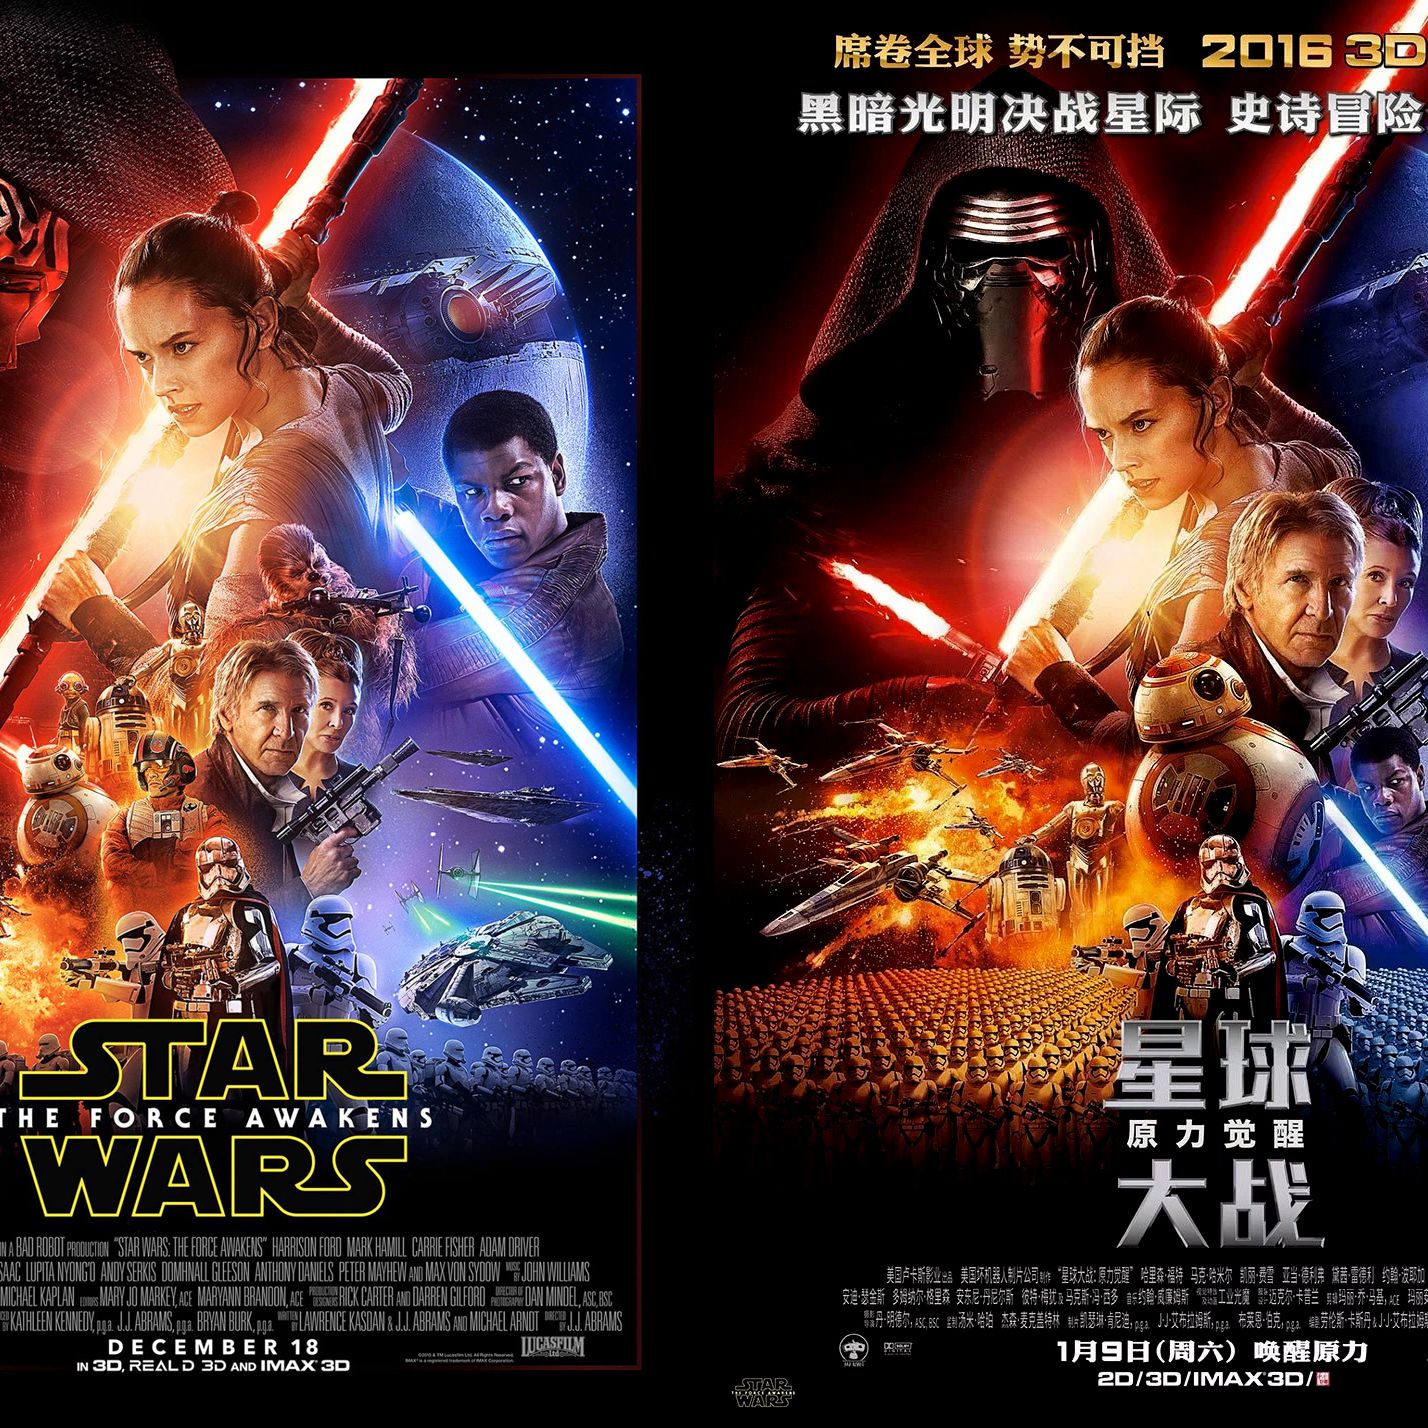 heb vertrouwen Feodaal moreel Star Wars: The Force Awakens' China poster 'racist' | CNN